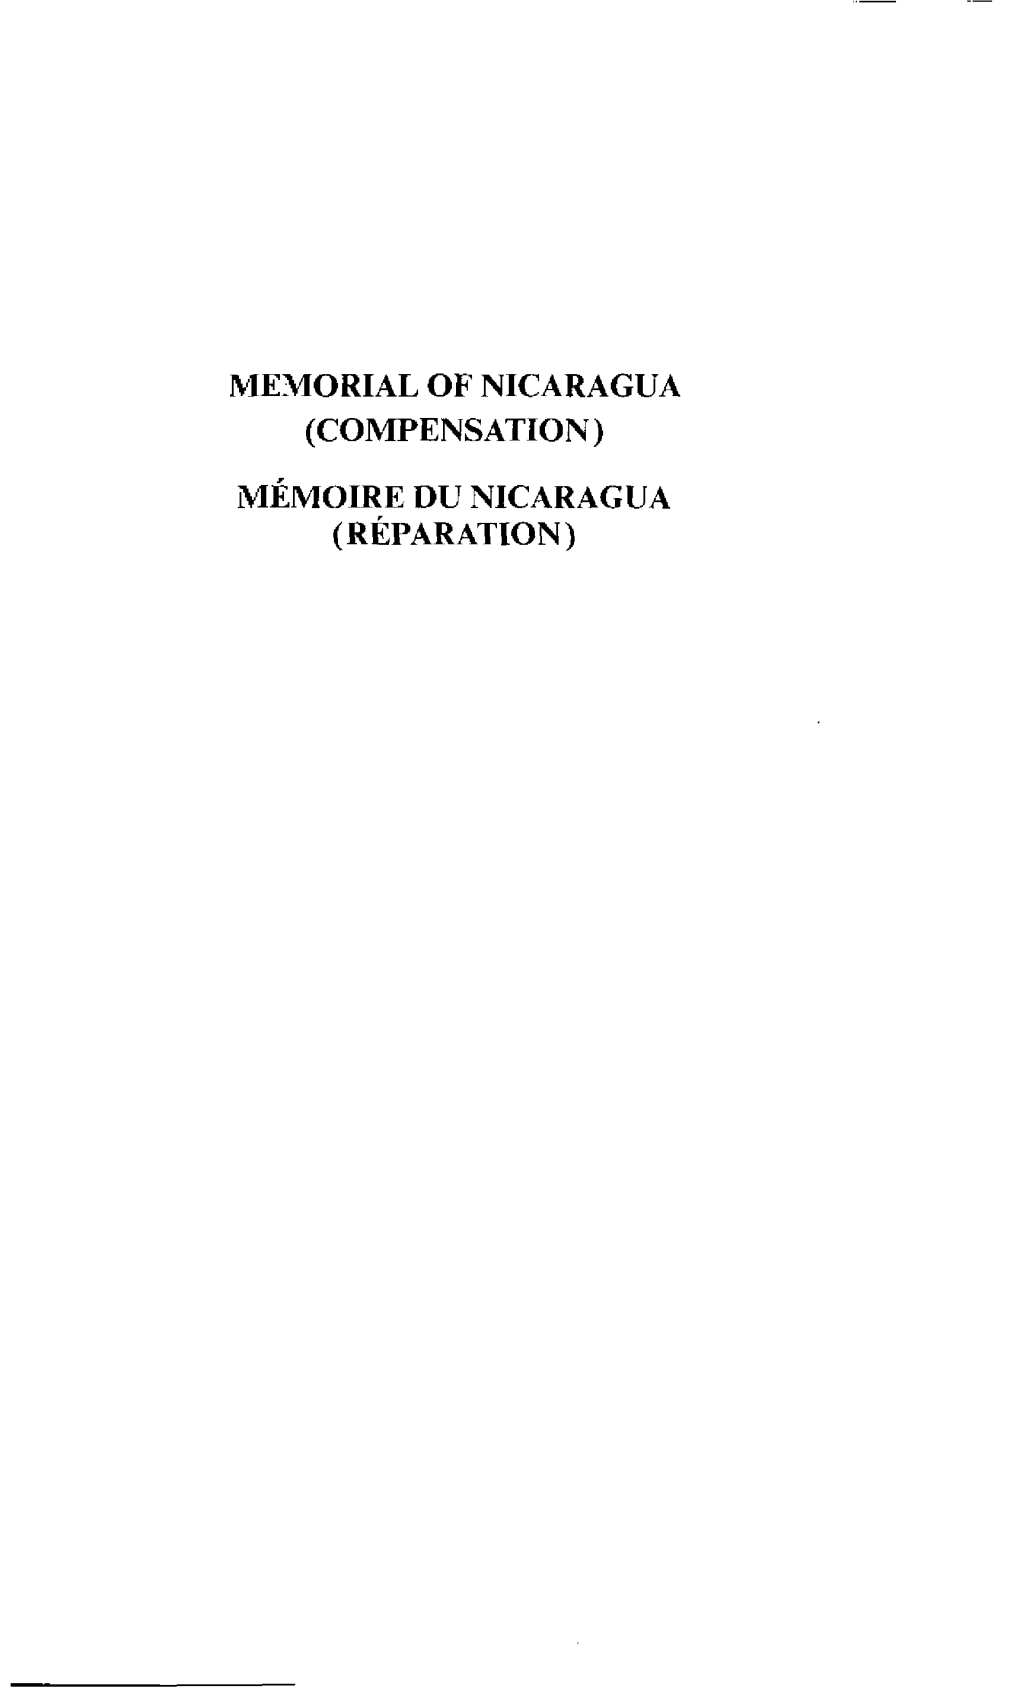 Niemorial of Nicaragua (Compensation) Introduction